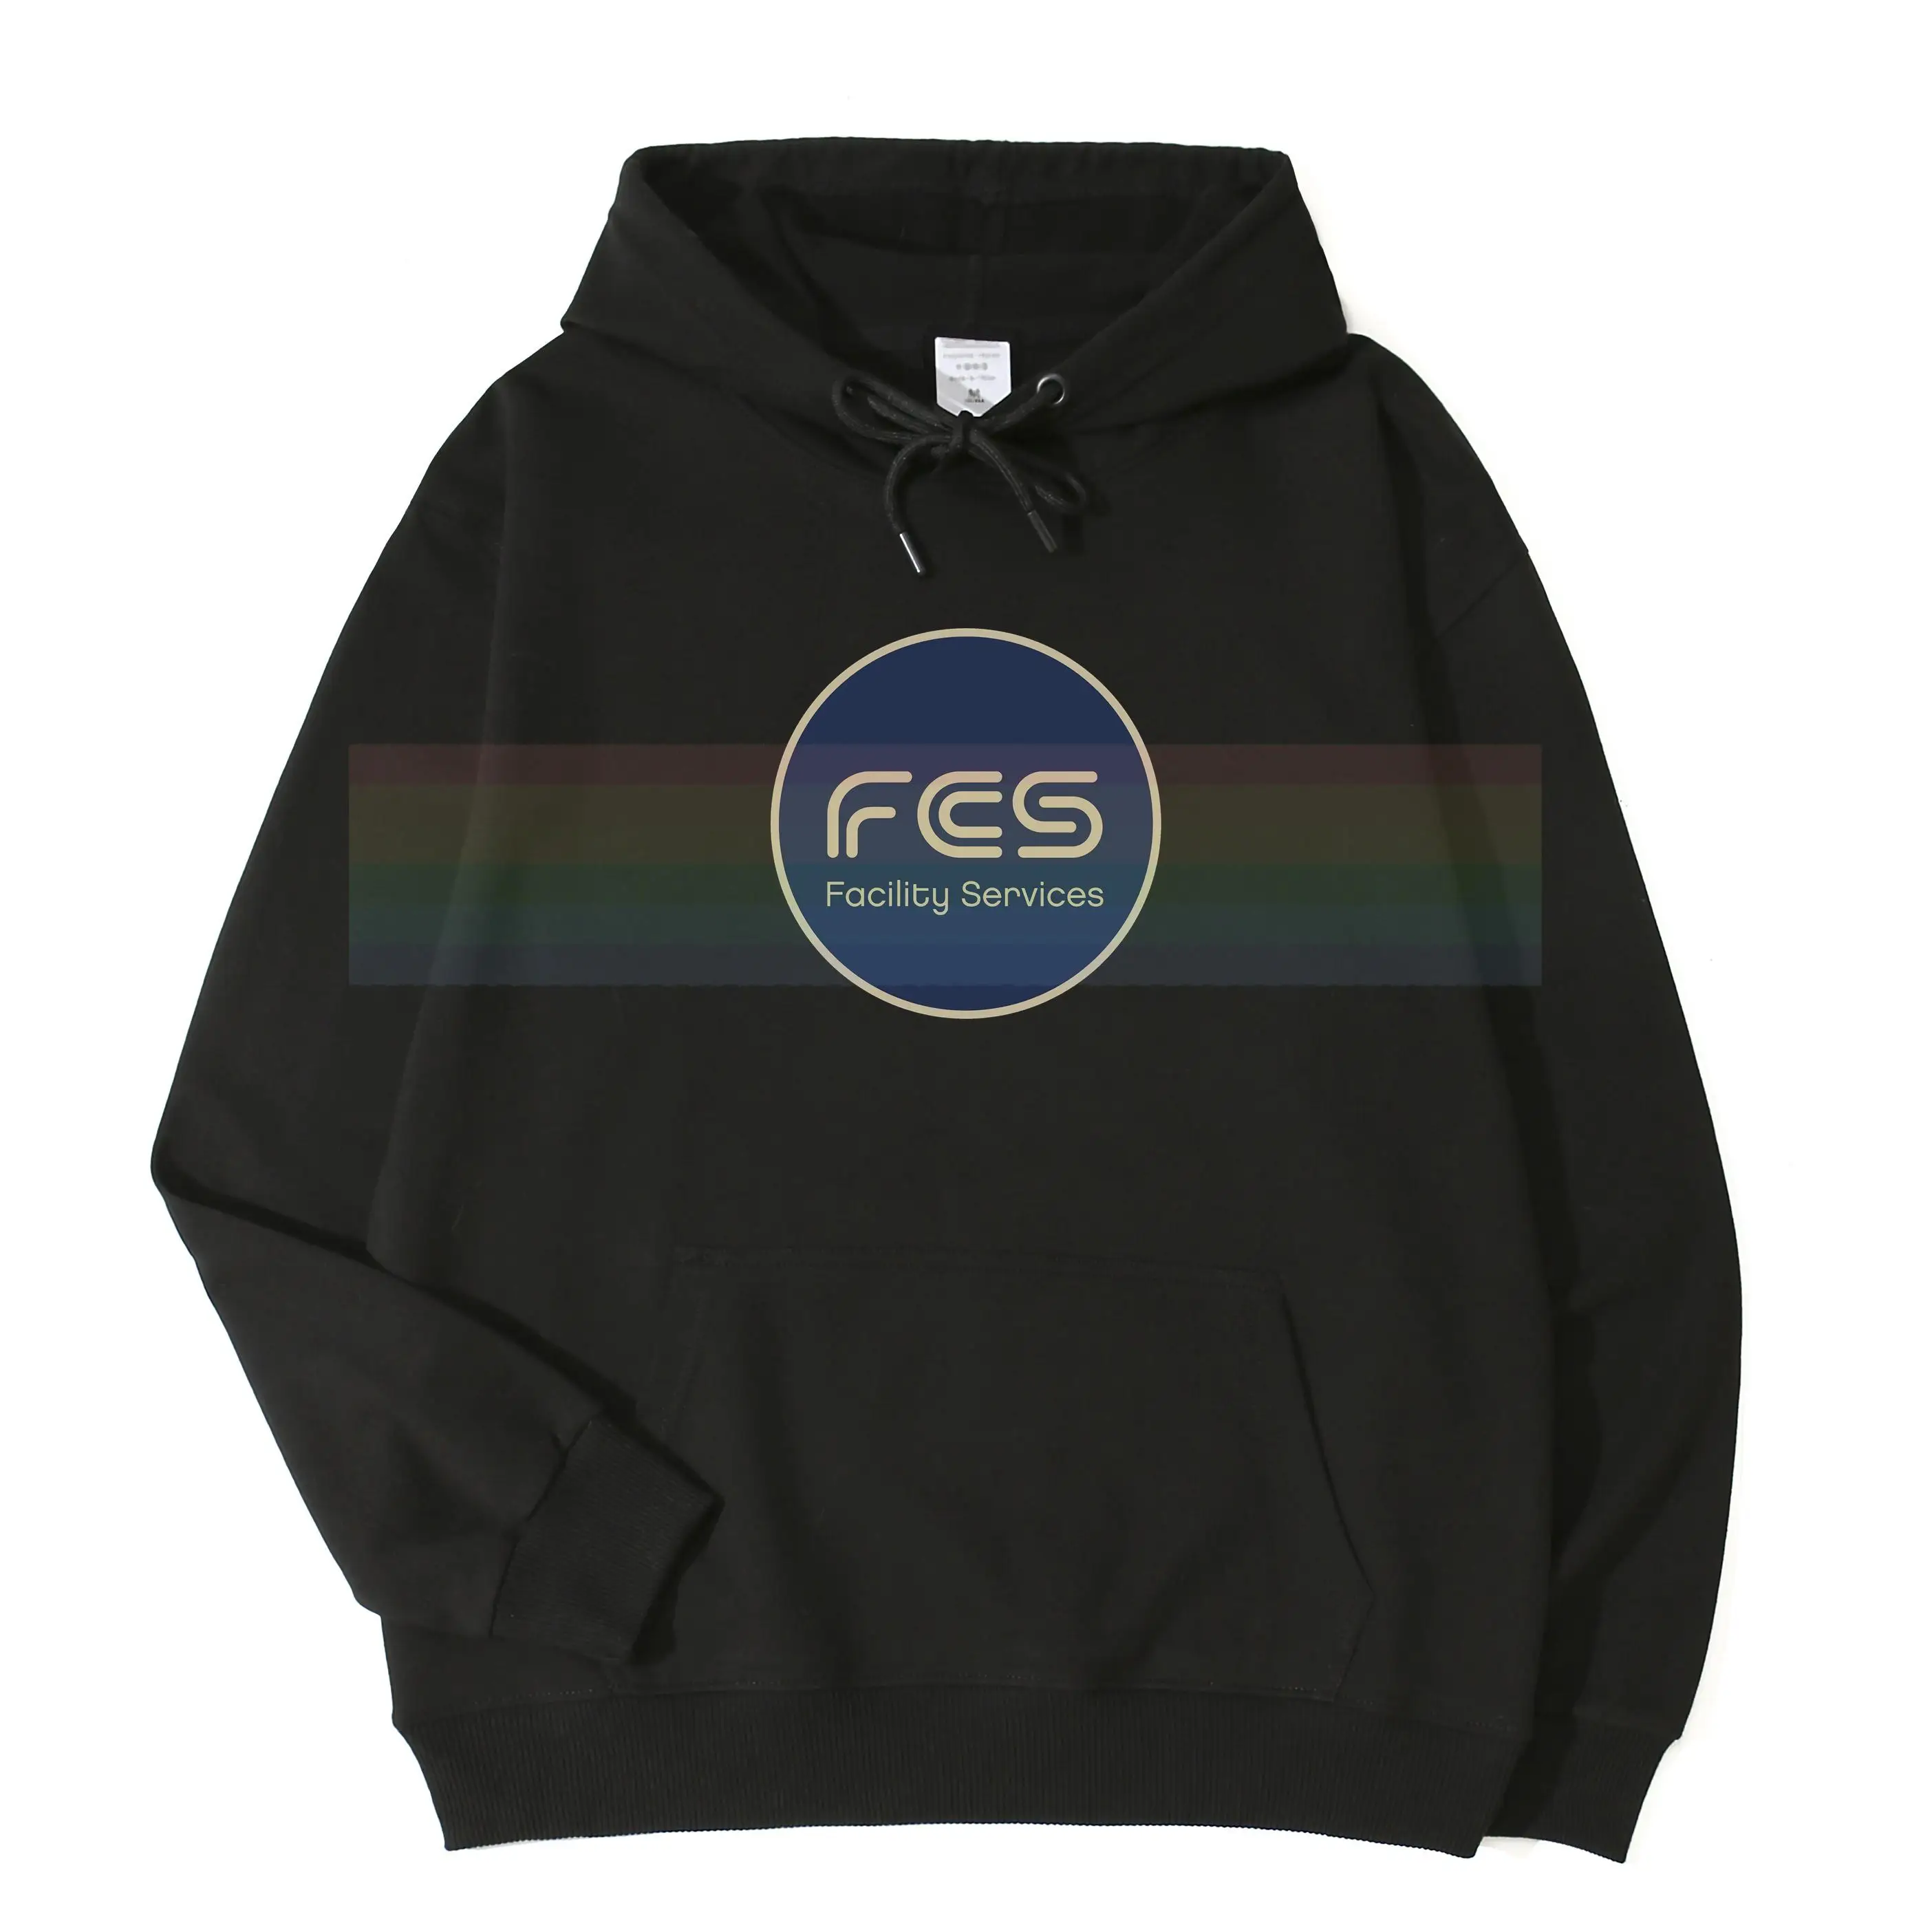 

Facility services FCS Men's Hoodies women Spring Autumn Paired Couples Casual Hoodies Sweatshirts surfing brand Hoodies TopsN05